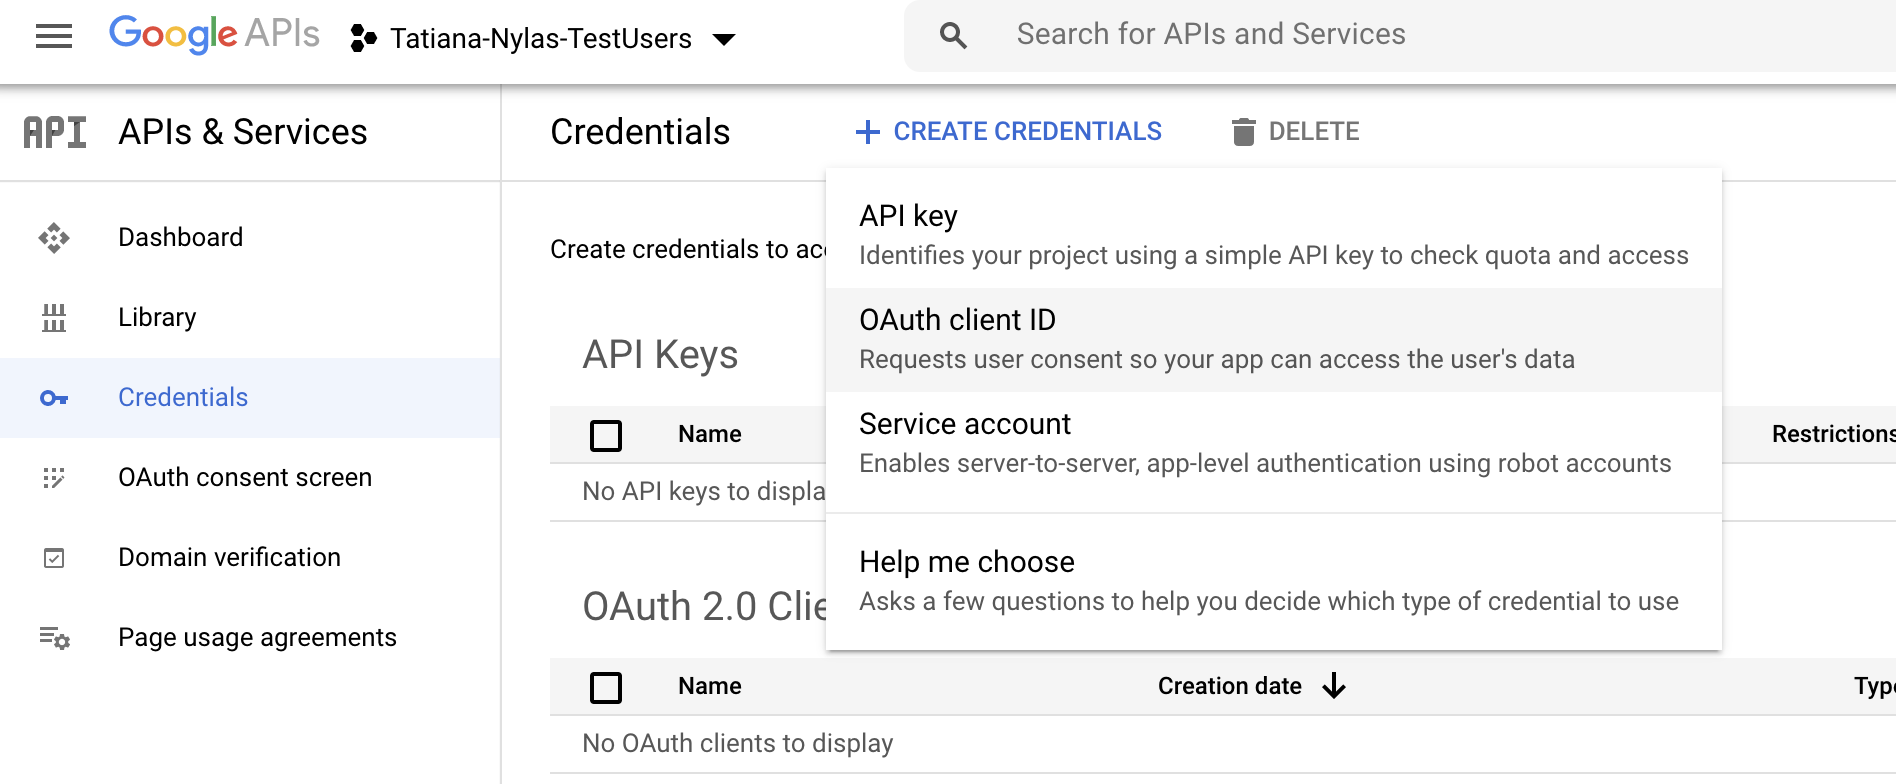 The Google Cloud Platform Console showing the "Credentials" page. The "Create credentials" drop-down list is expanded, and the "OAuth client ID" option is highlighted.